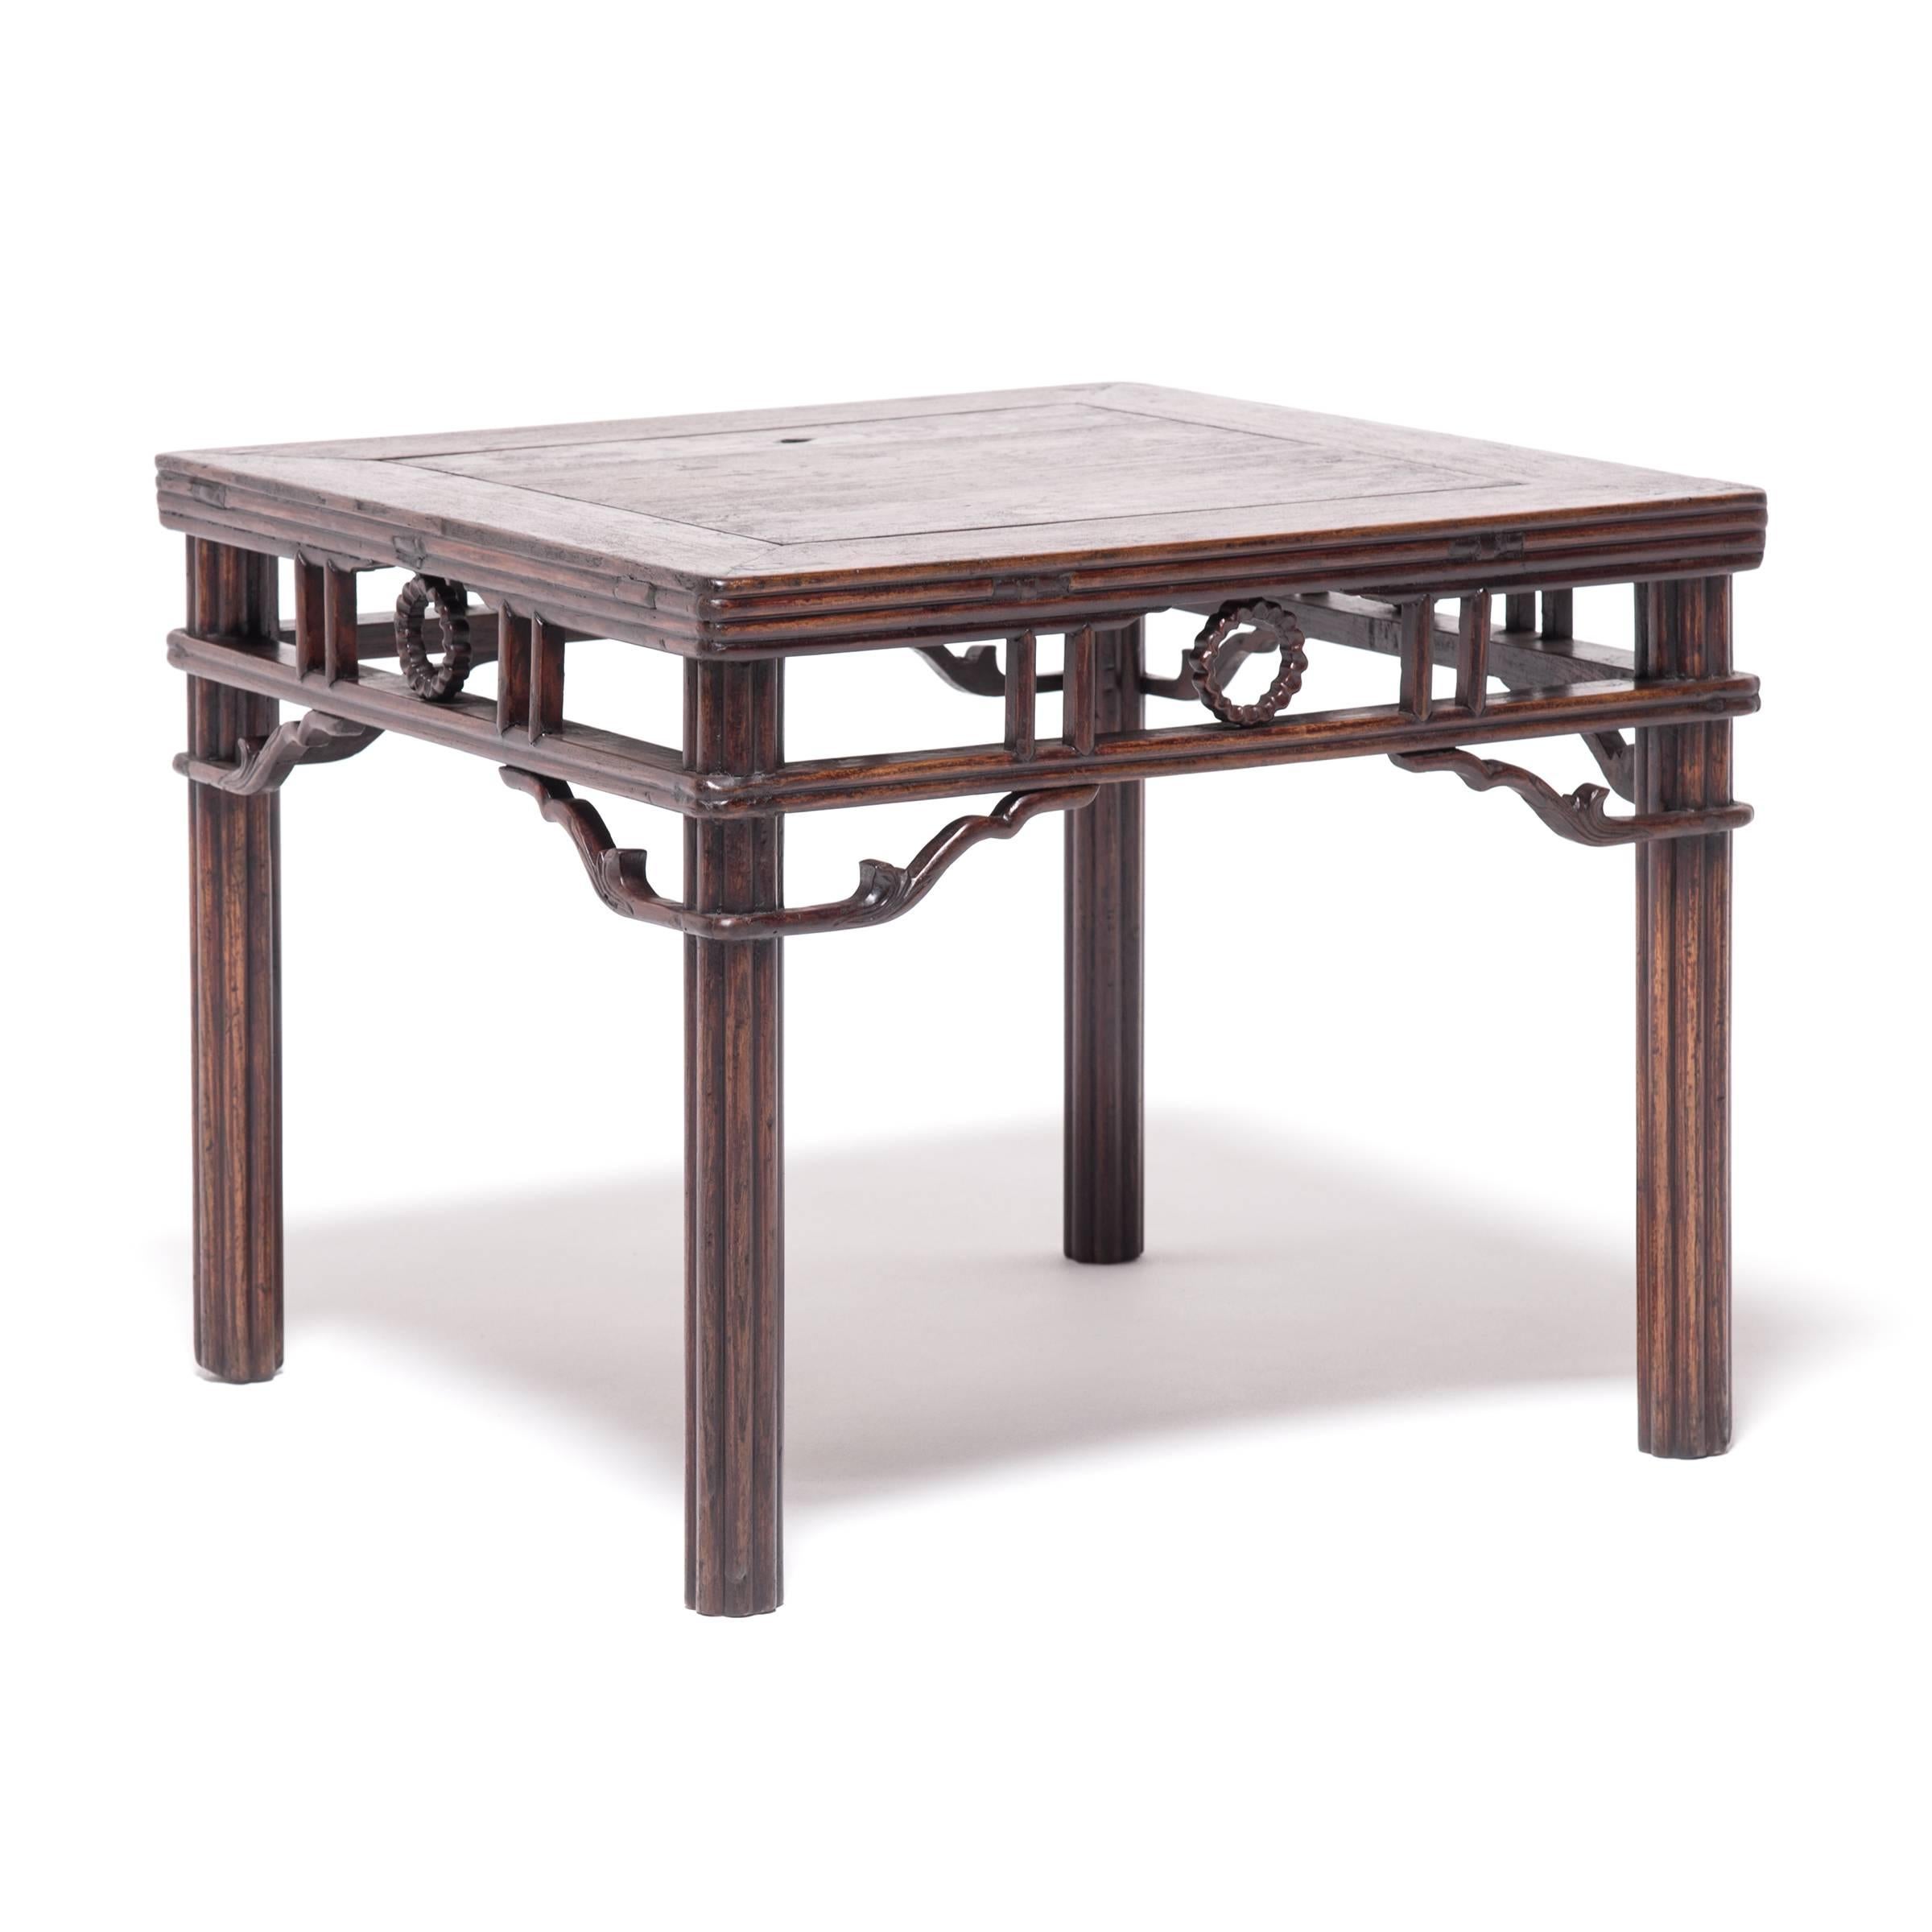 Hand-Carved Chinese Square Chrysanthemum Table